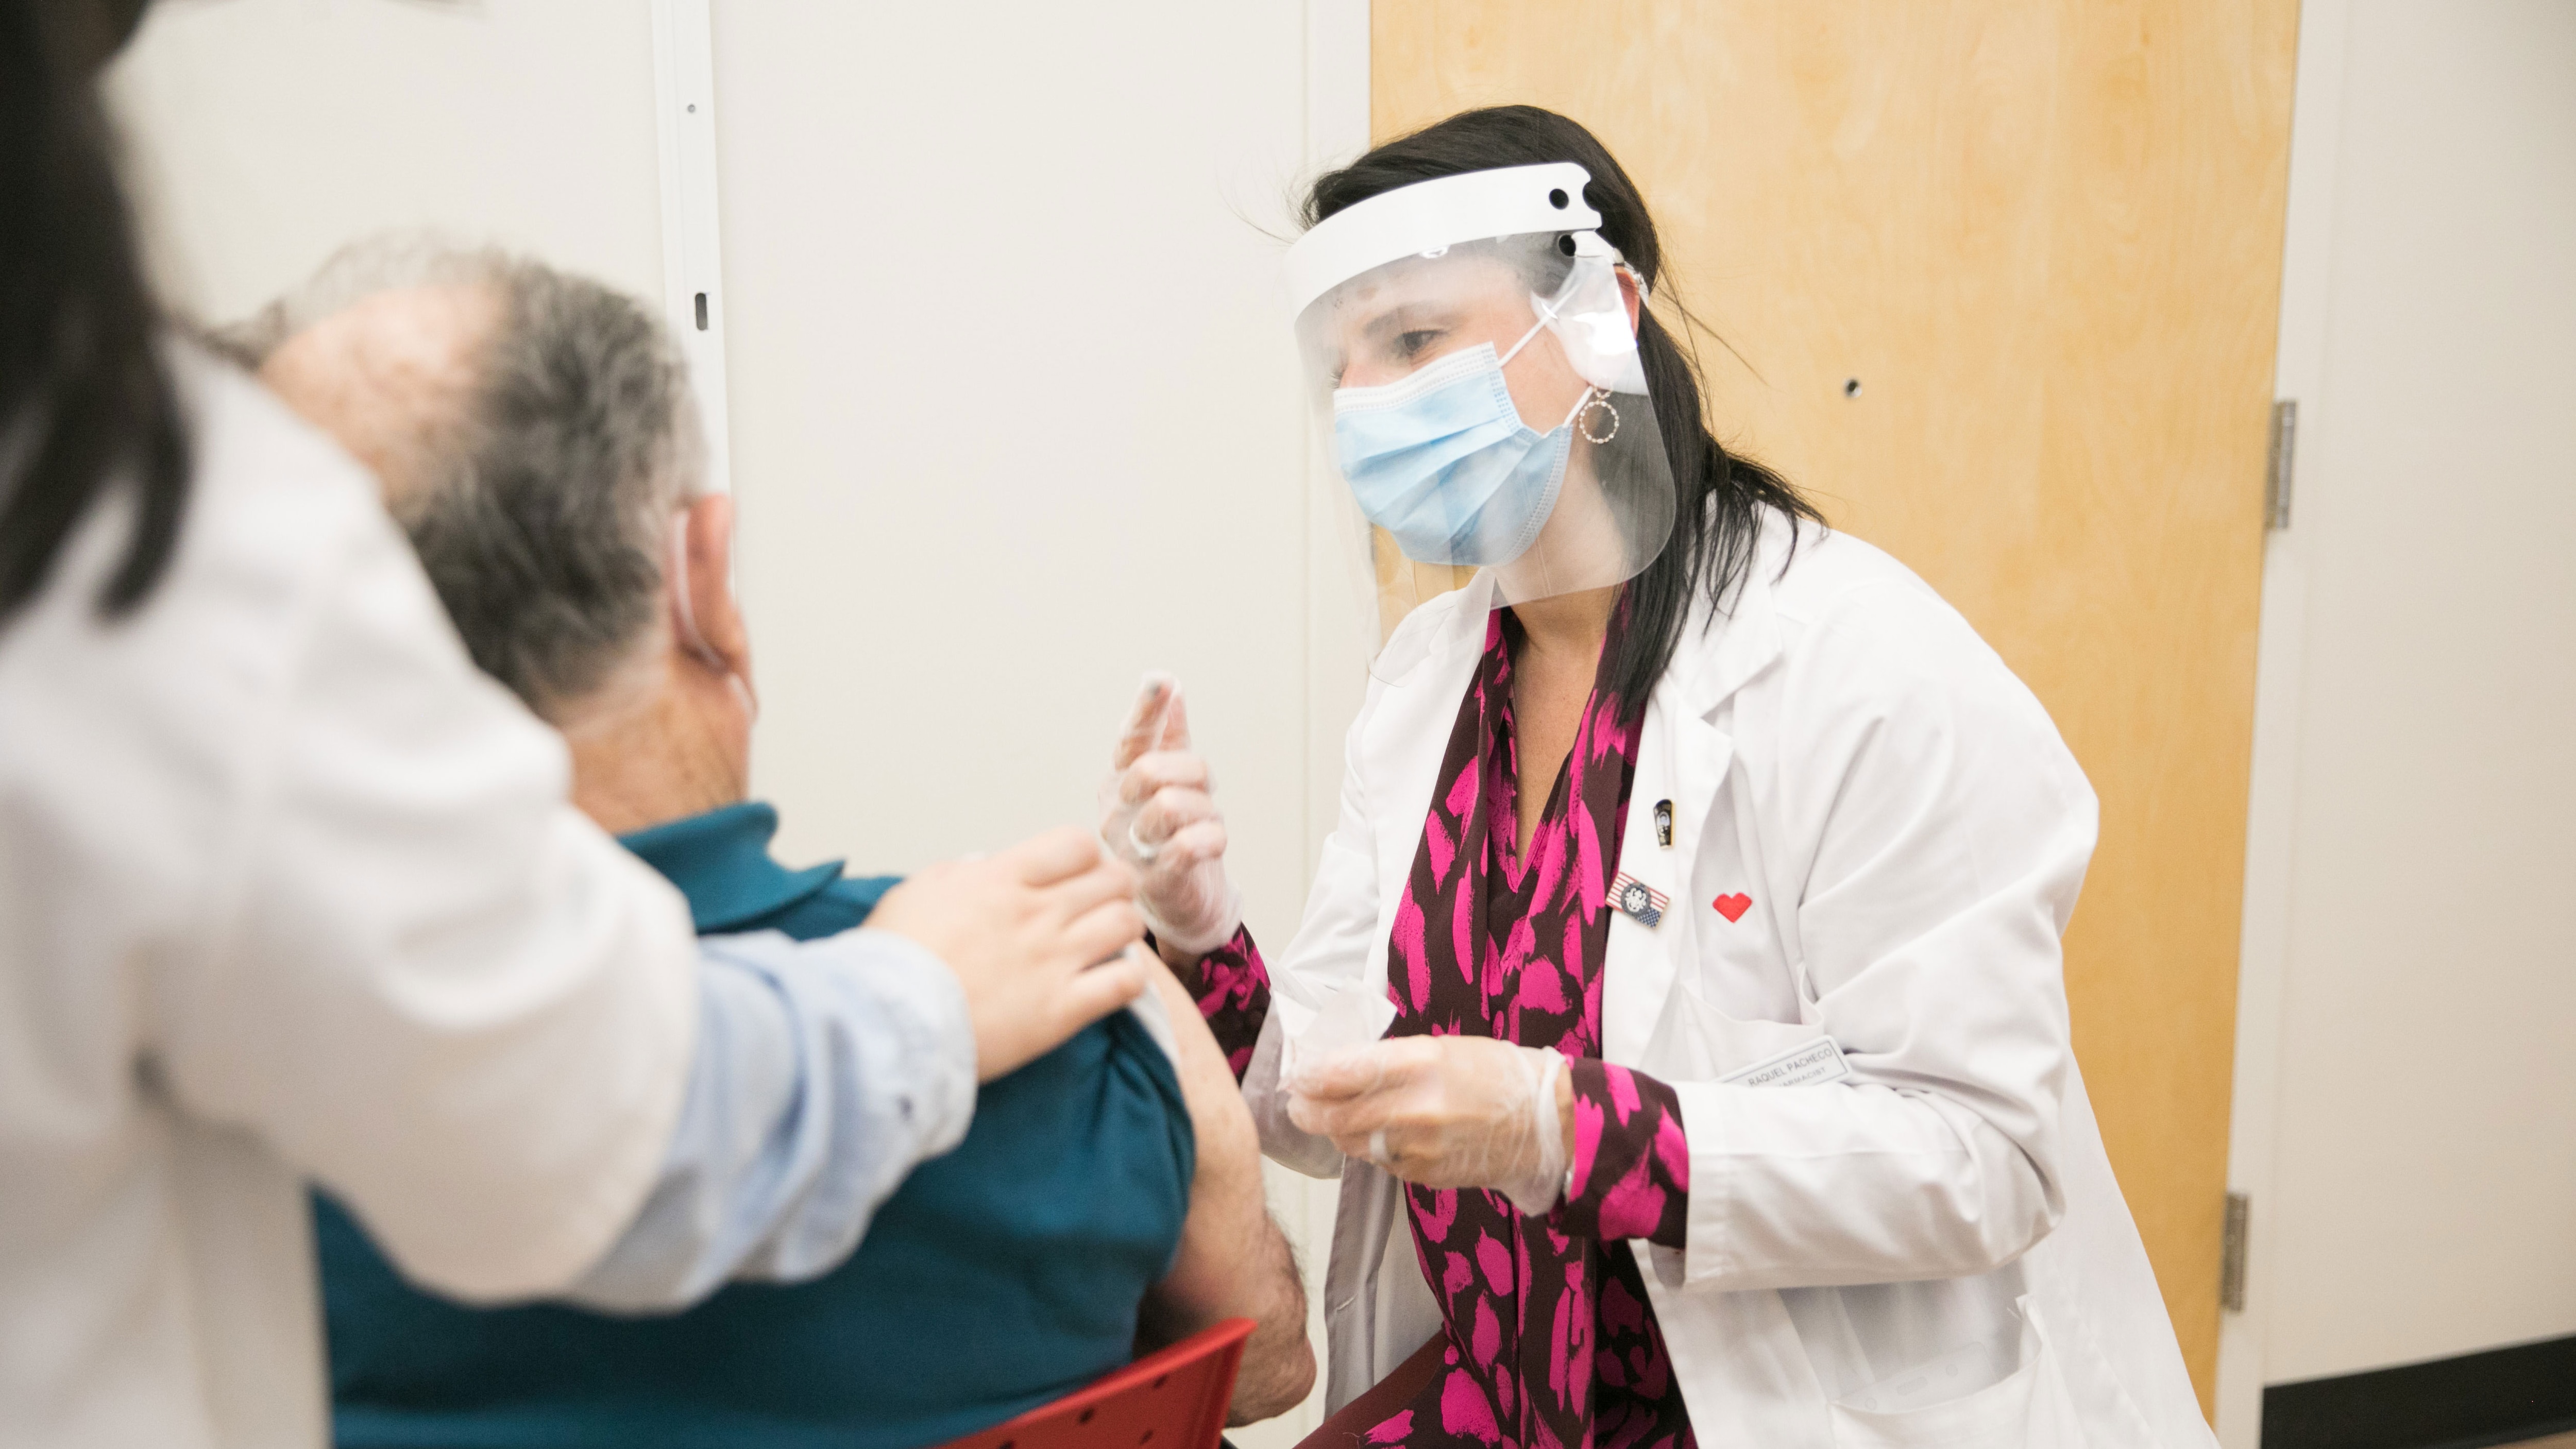 A CVS MinuteClinic practitioner prepares to administer a COVID-19 vaccine.